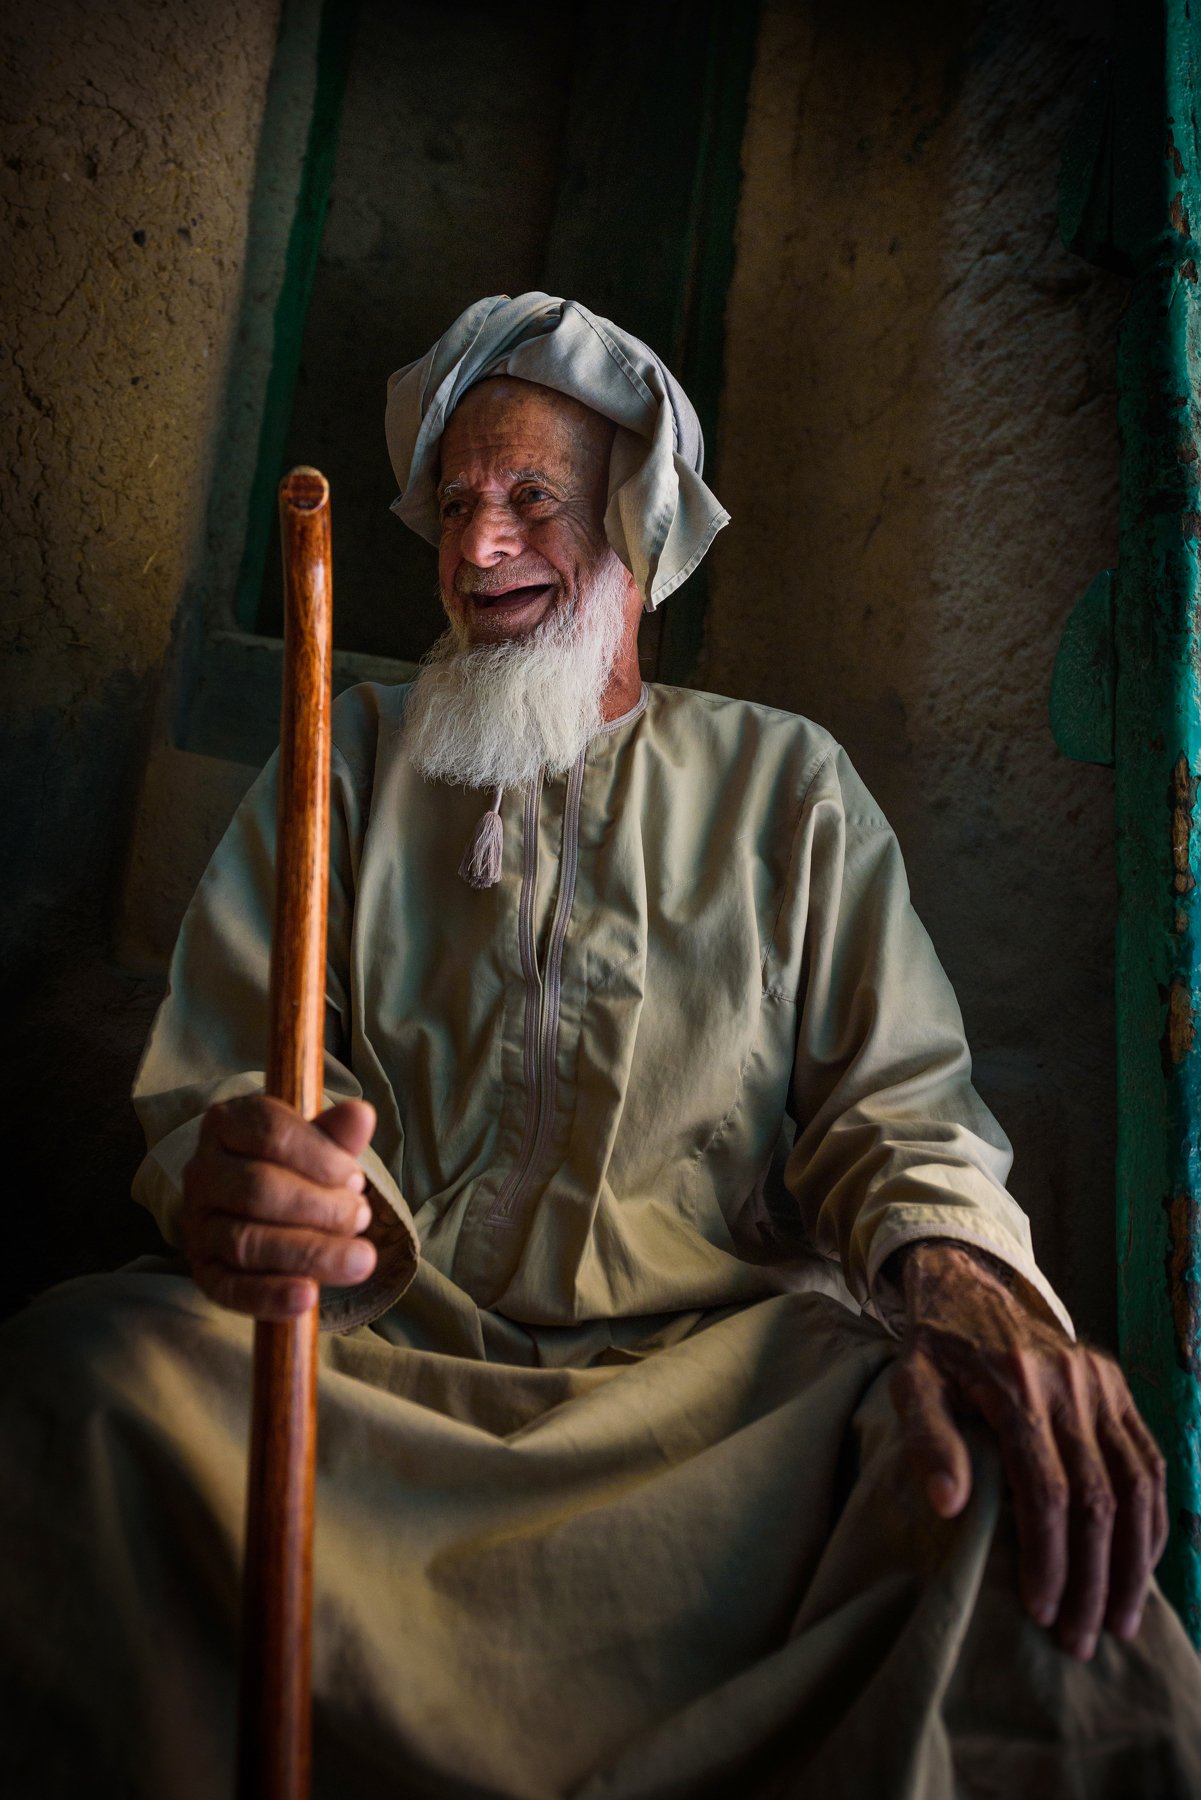 Colors,Old man, hussein